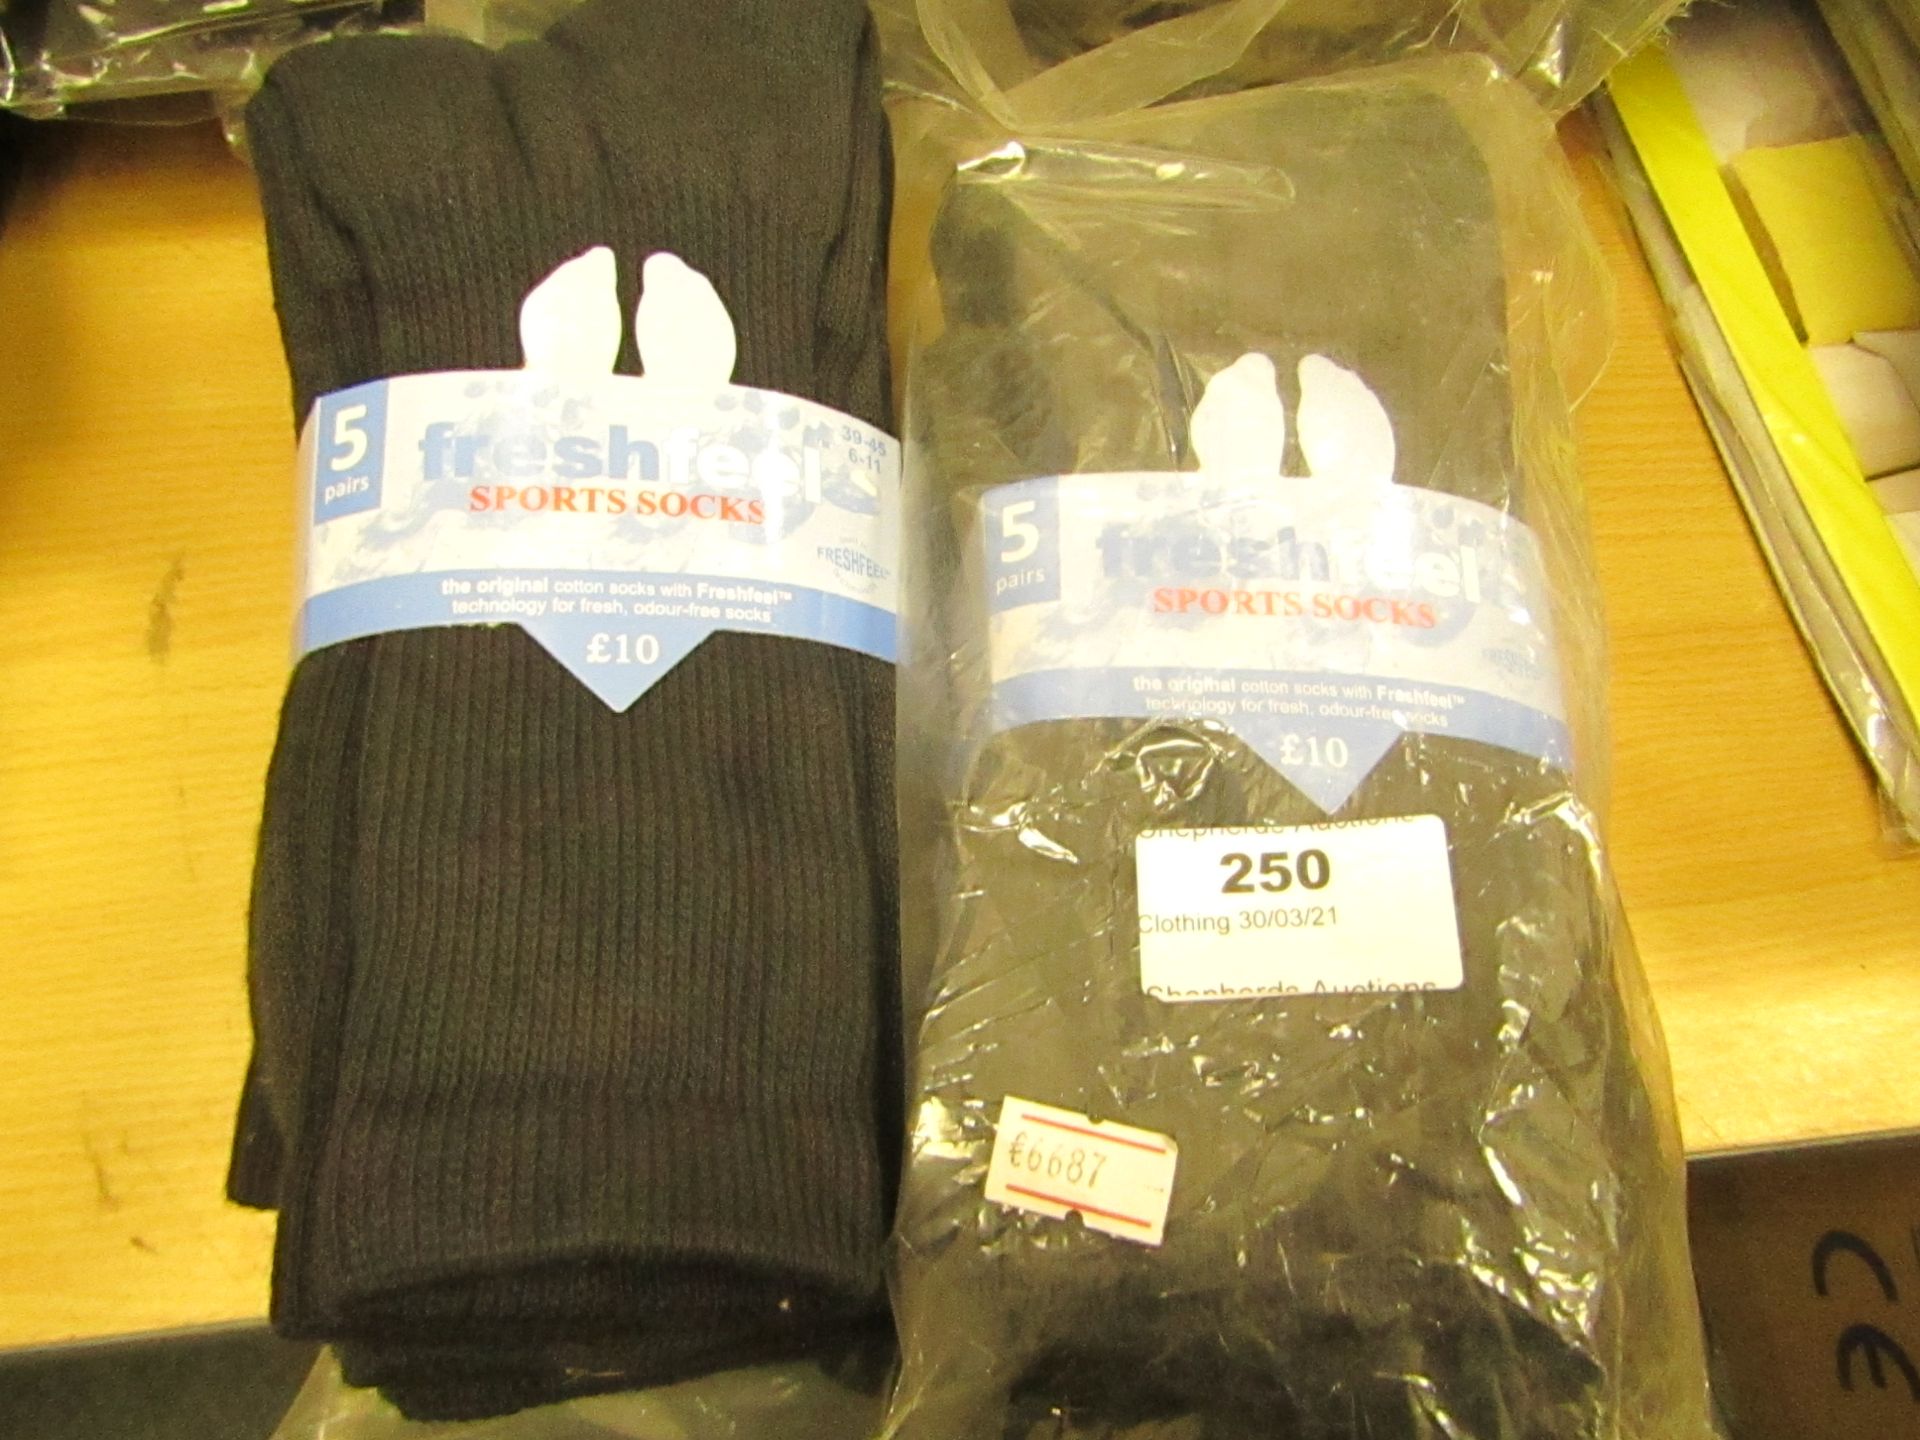 10 X Pairs of Mens Sport Socks Black Size 6 to 11 New & Packaged